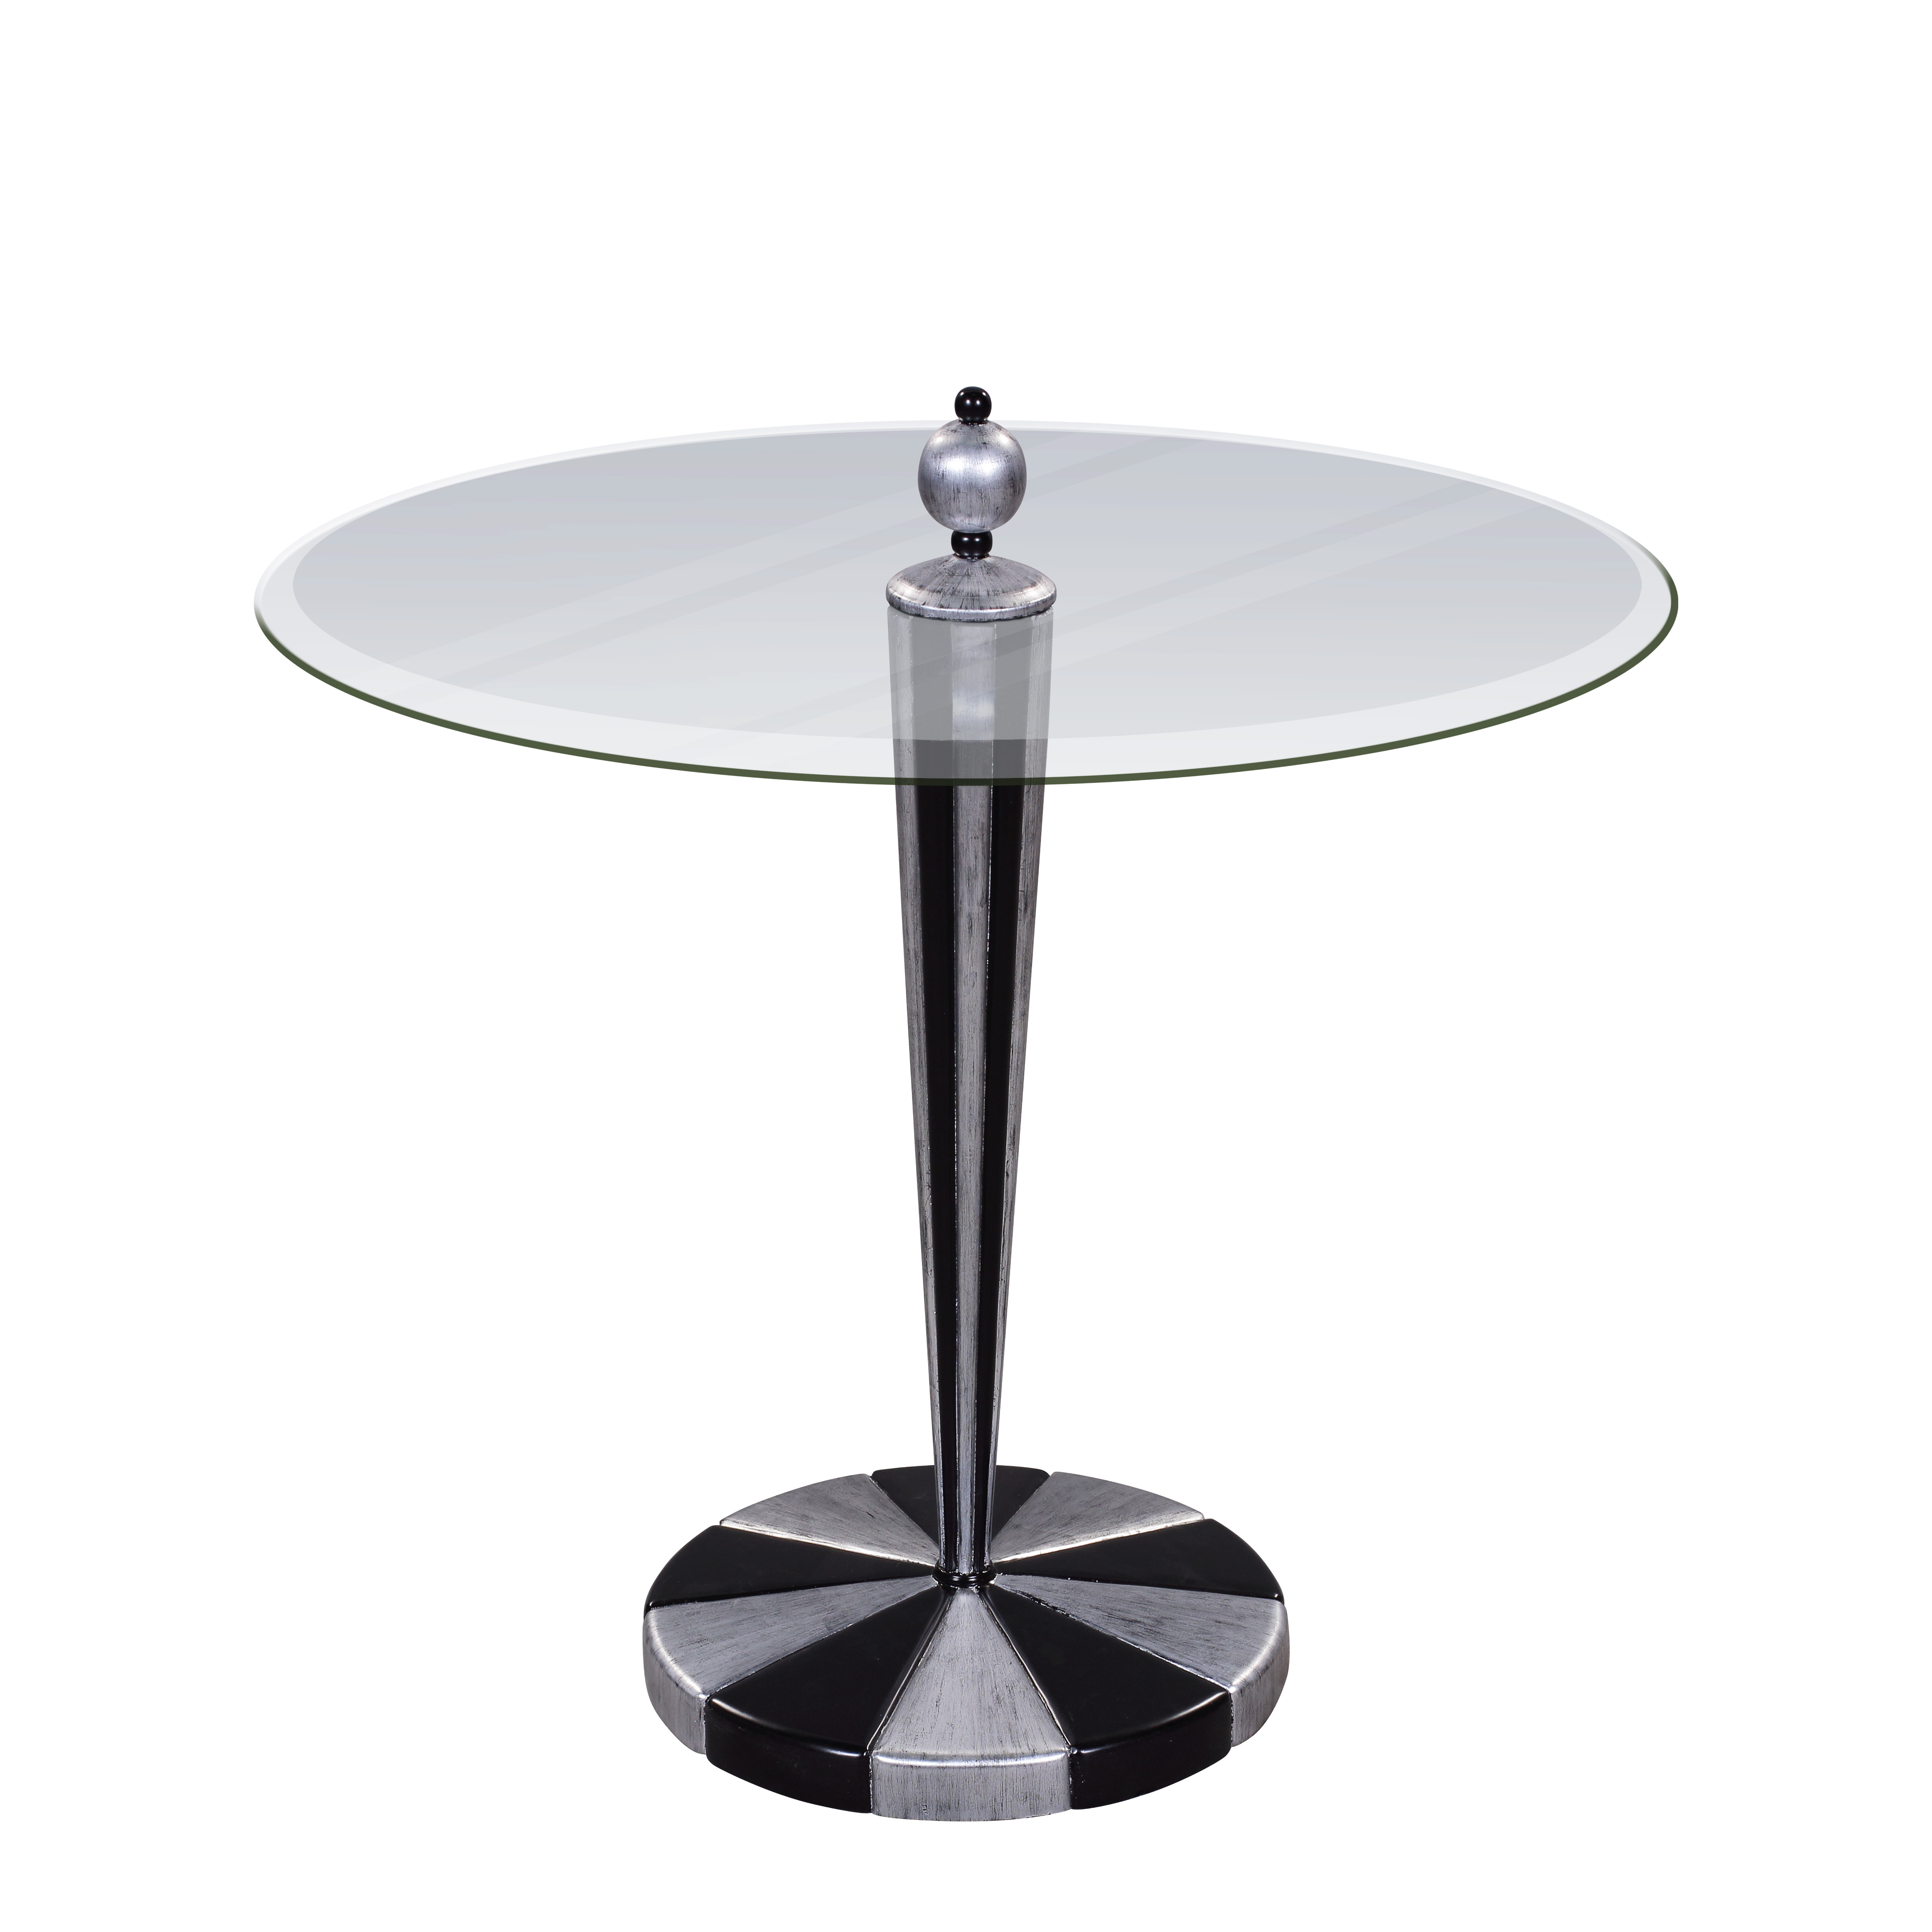 34560 - Server Table Pierot, SPECIAL FINISH